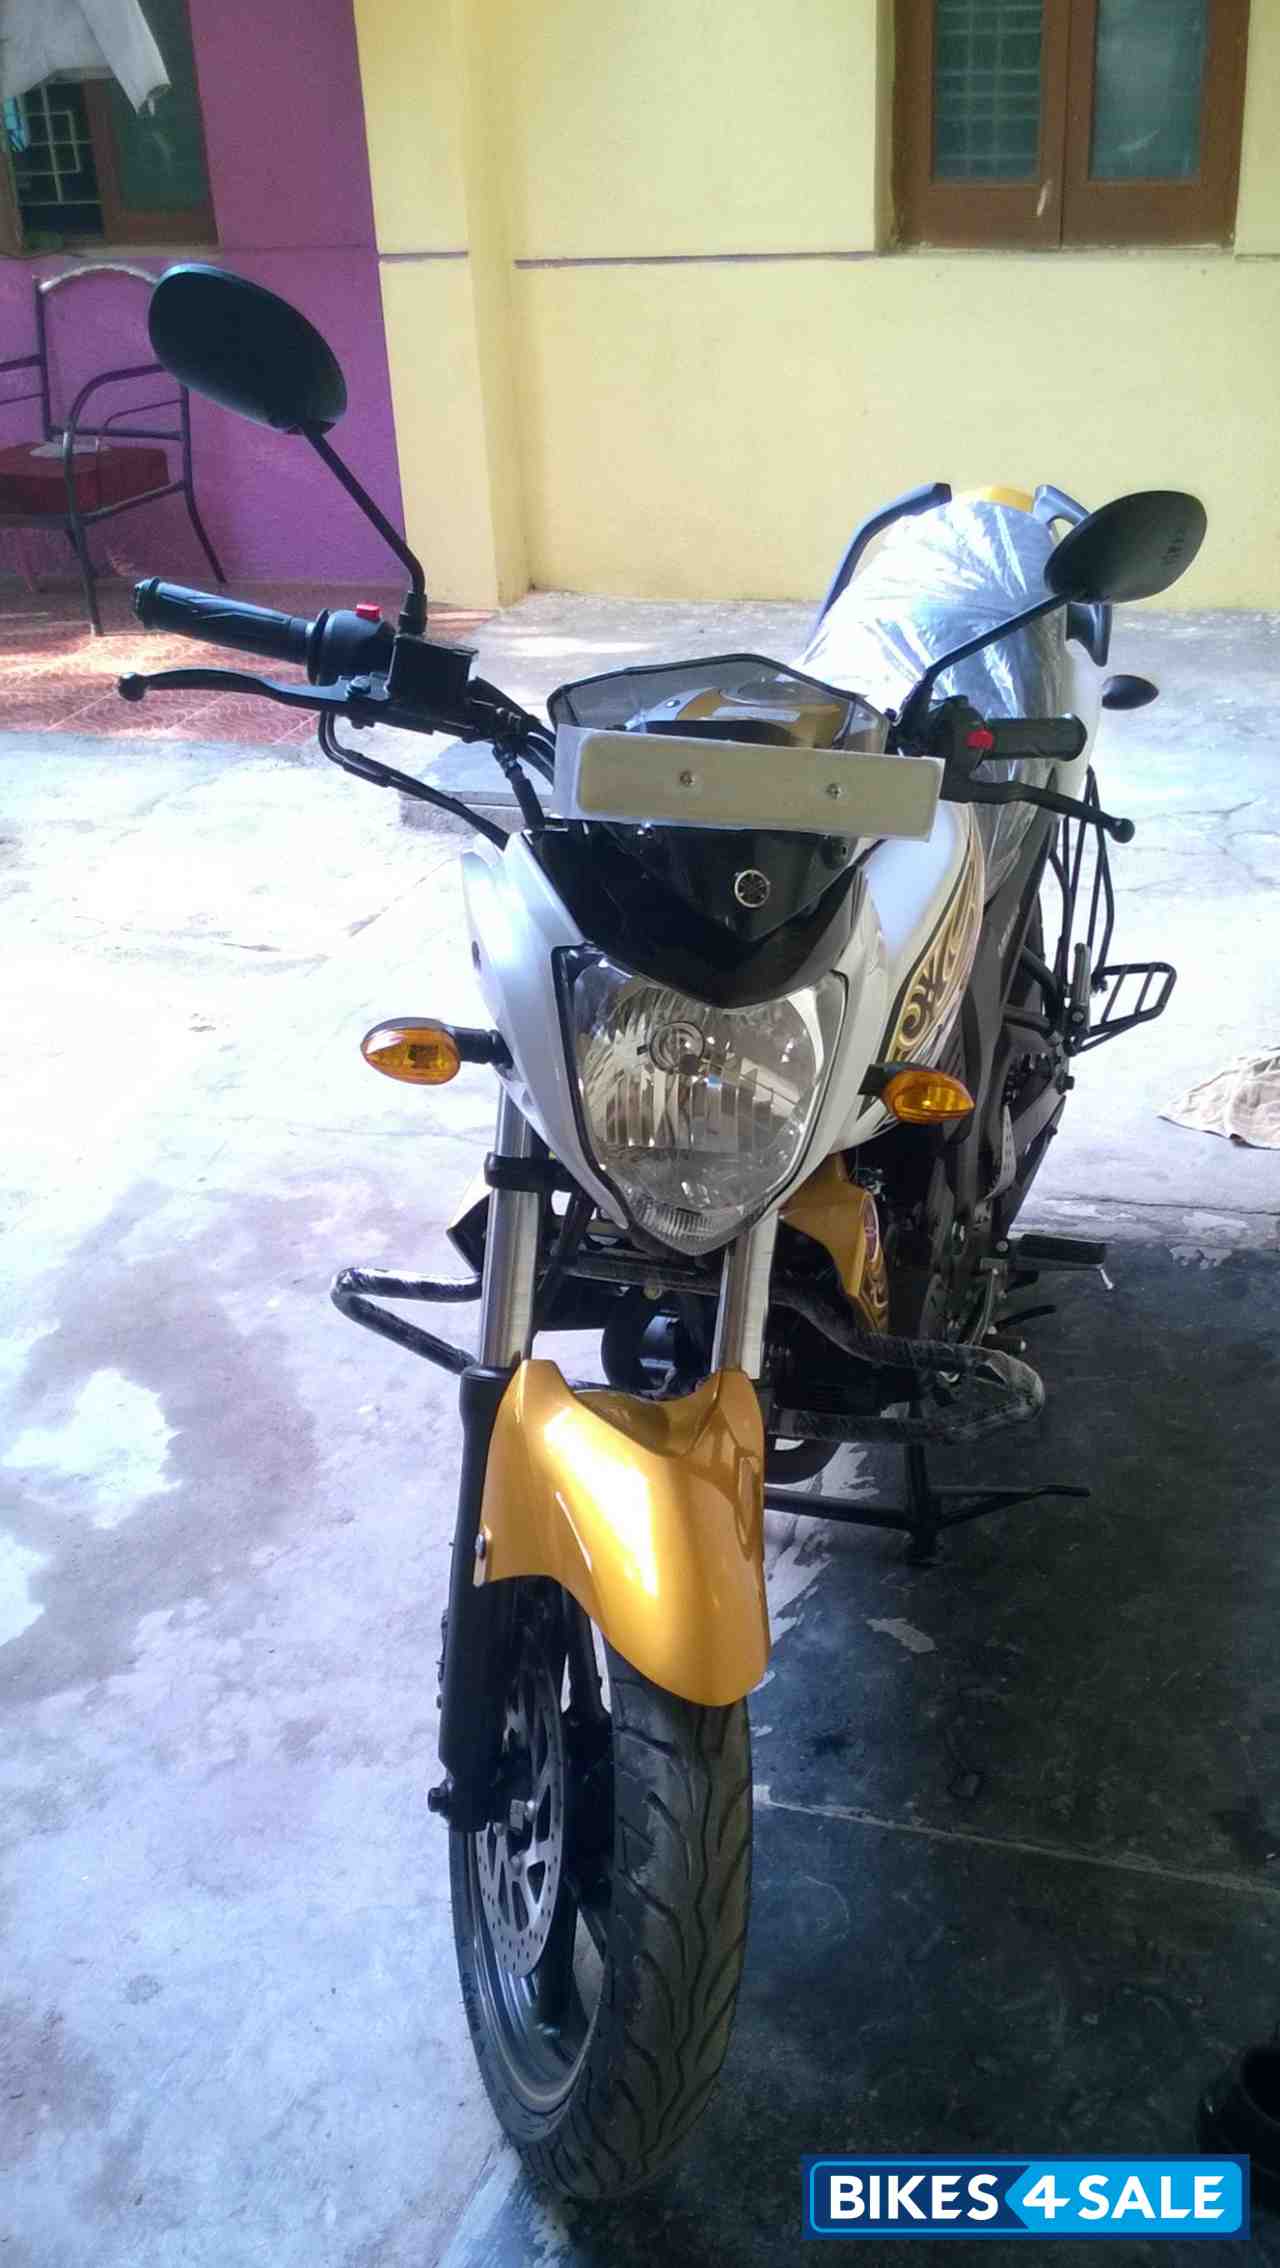 Used 2014 model Yamaha FZ-S for sale in Chennai. ID 275267 ...